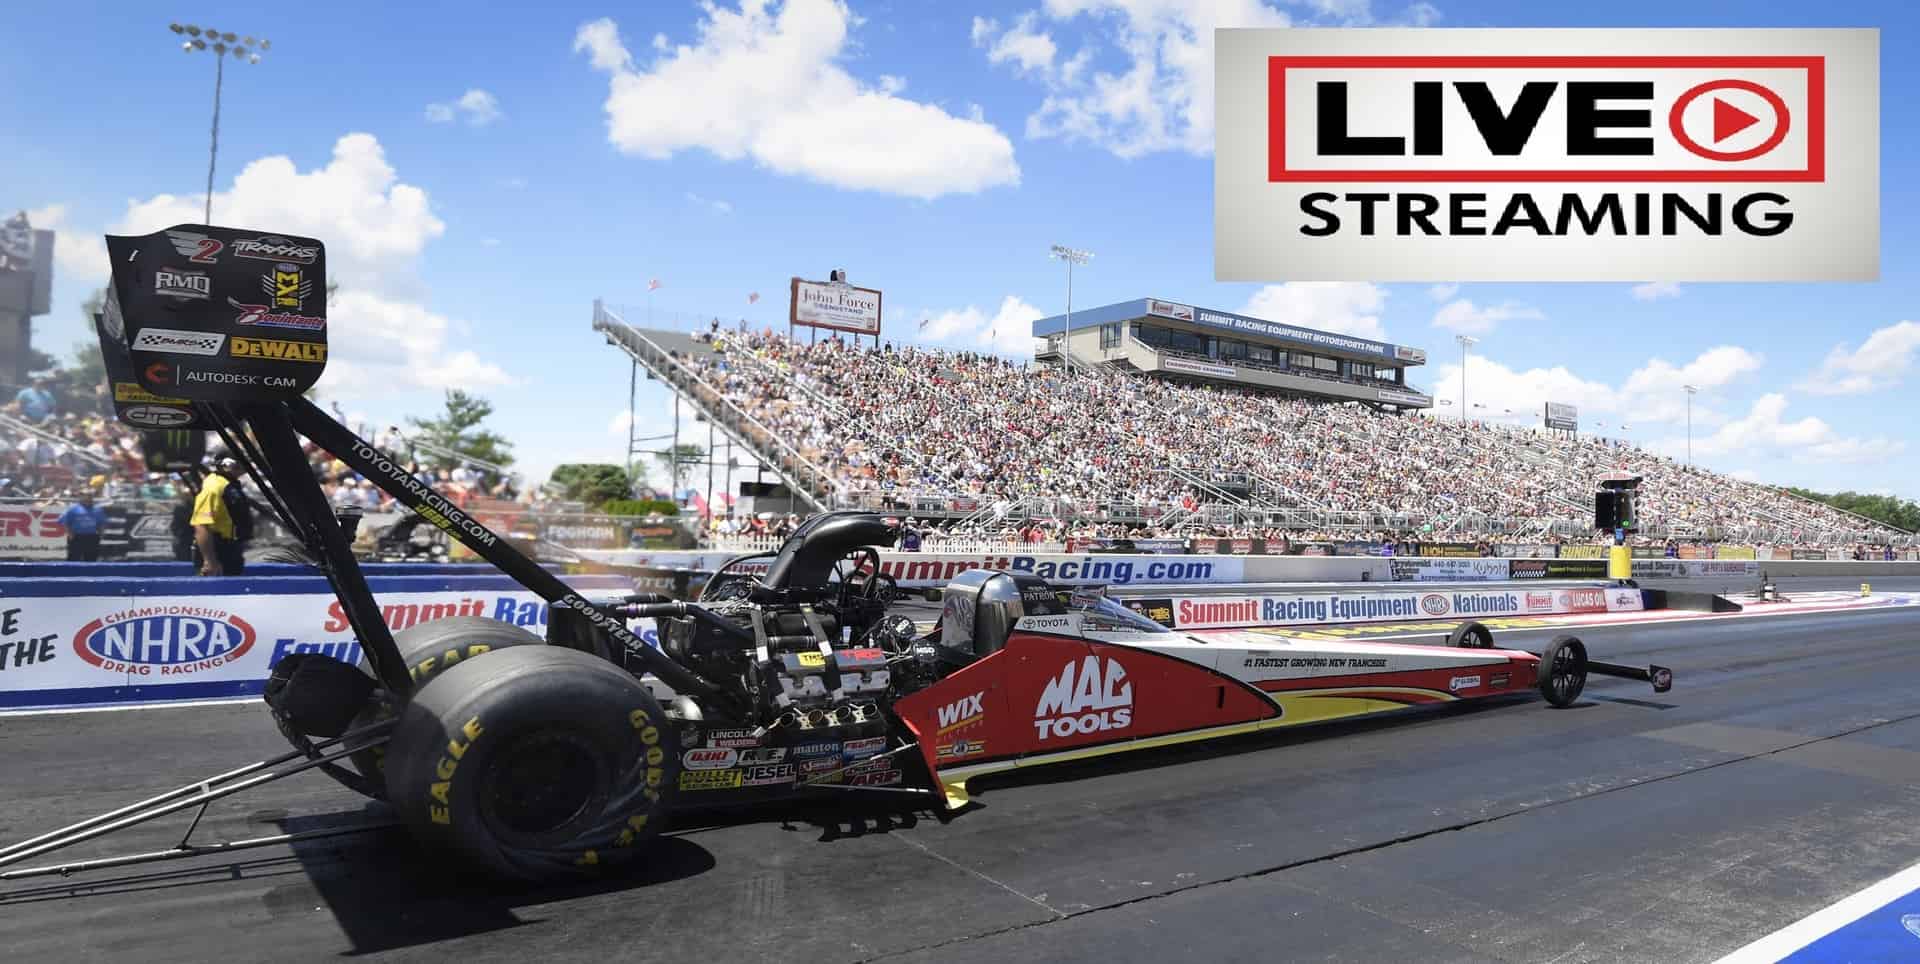 nhra-4-wide-nationals-2015-live-streaming